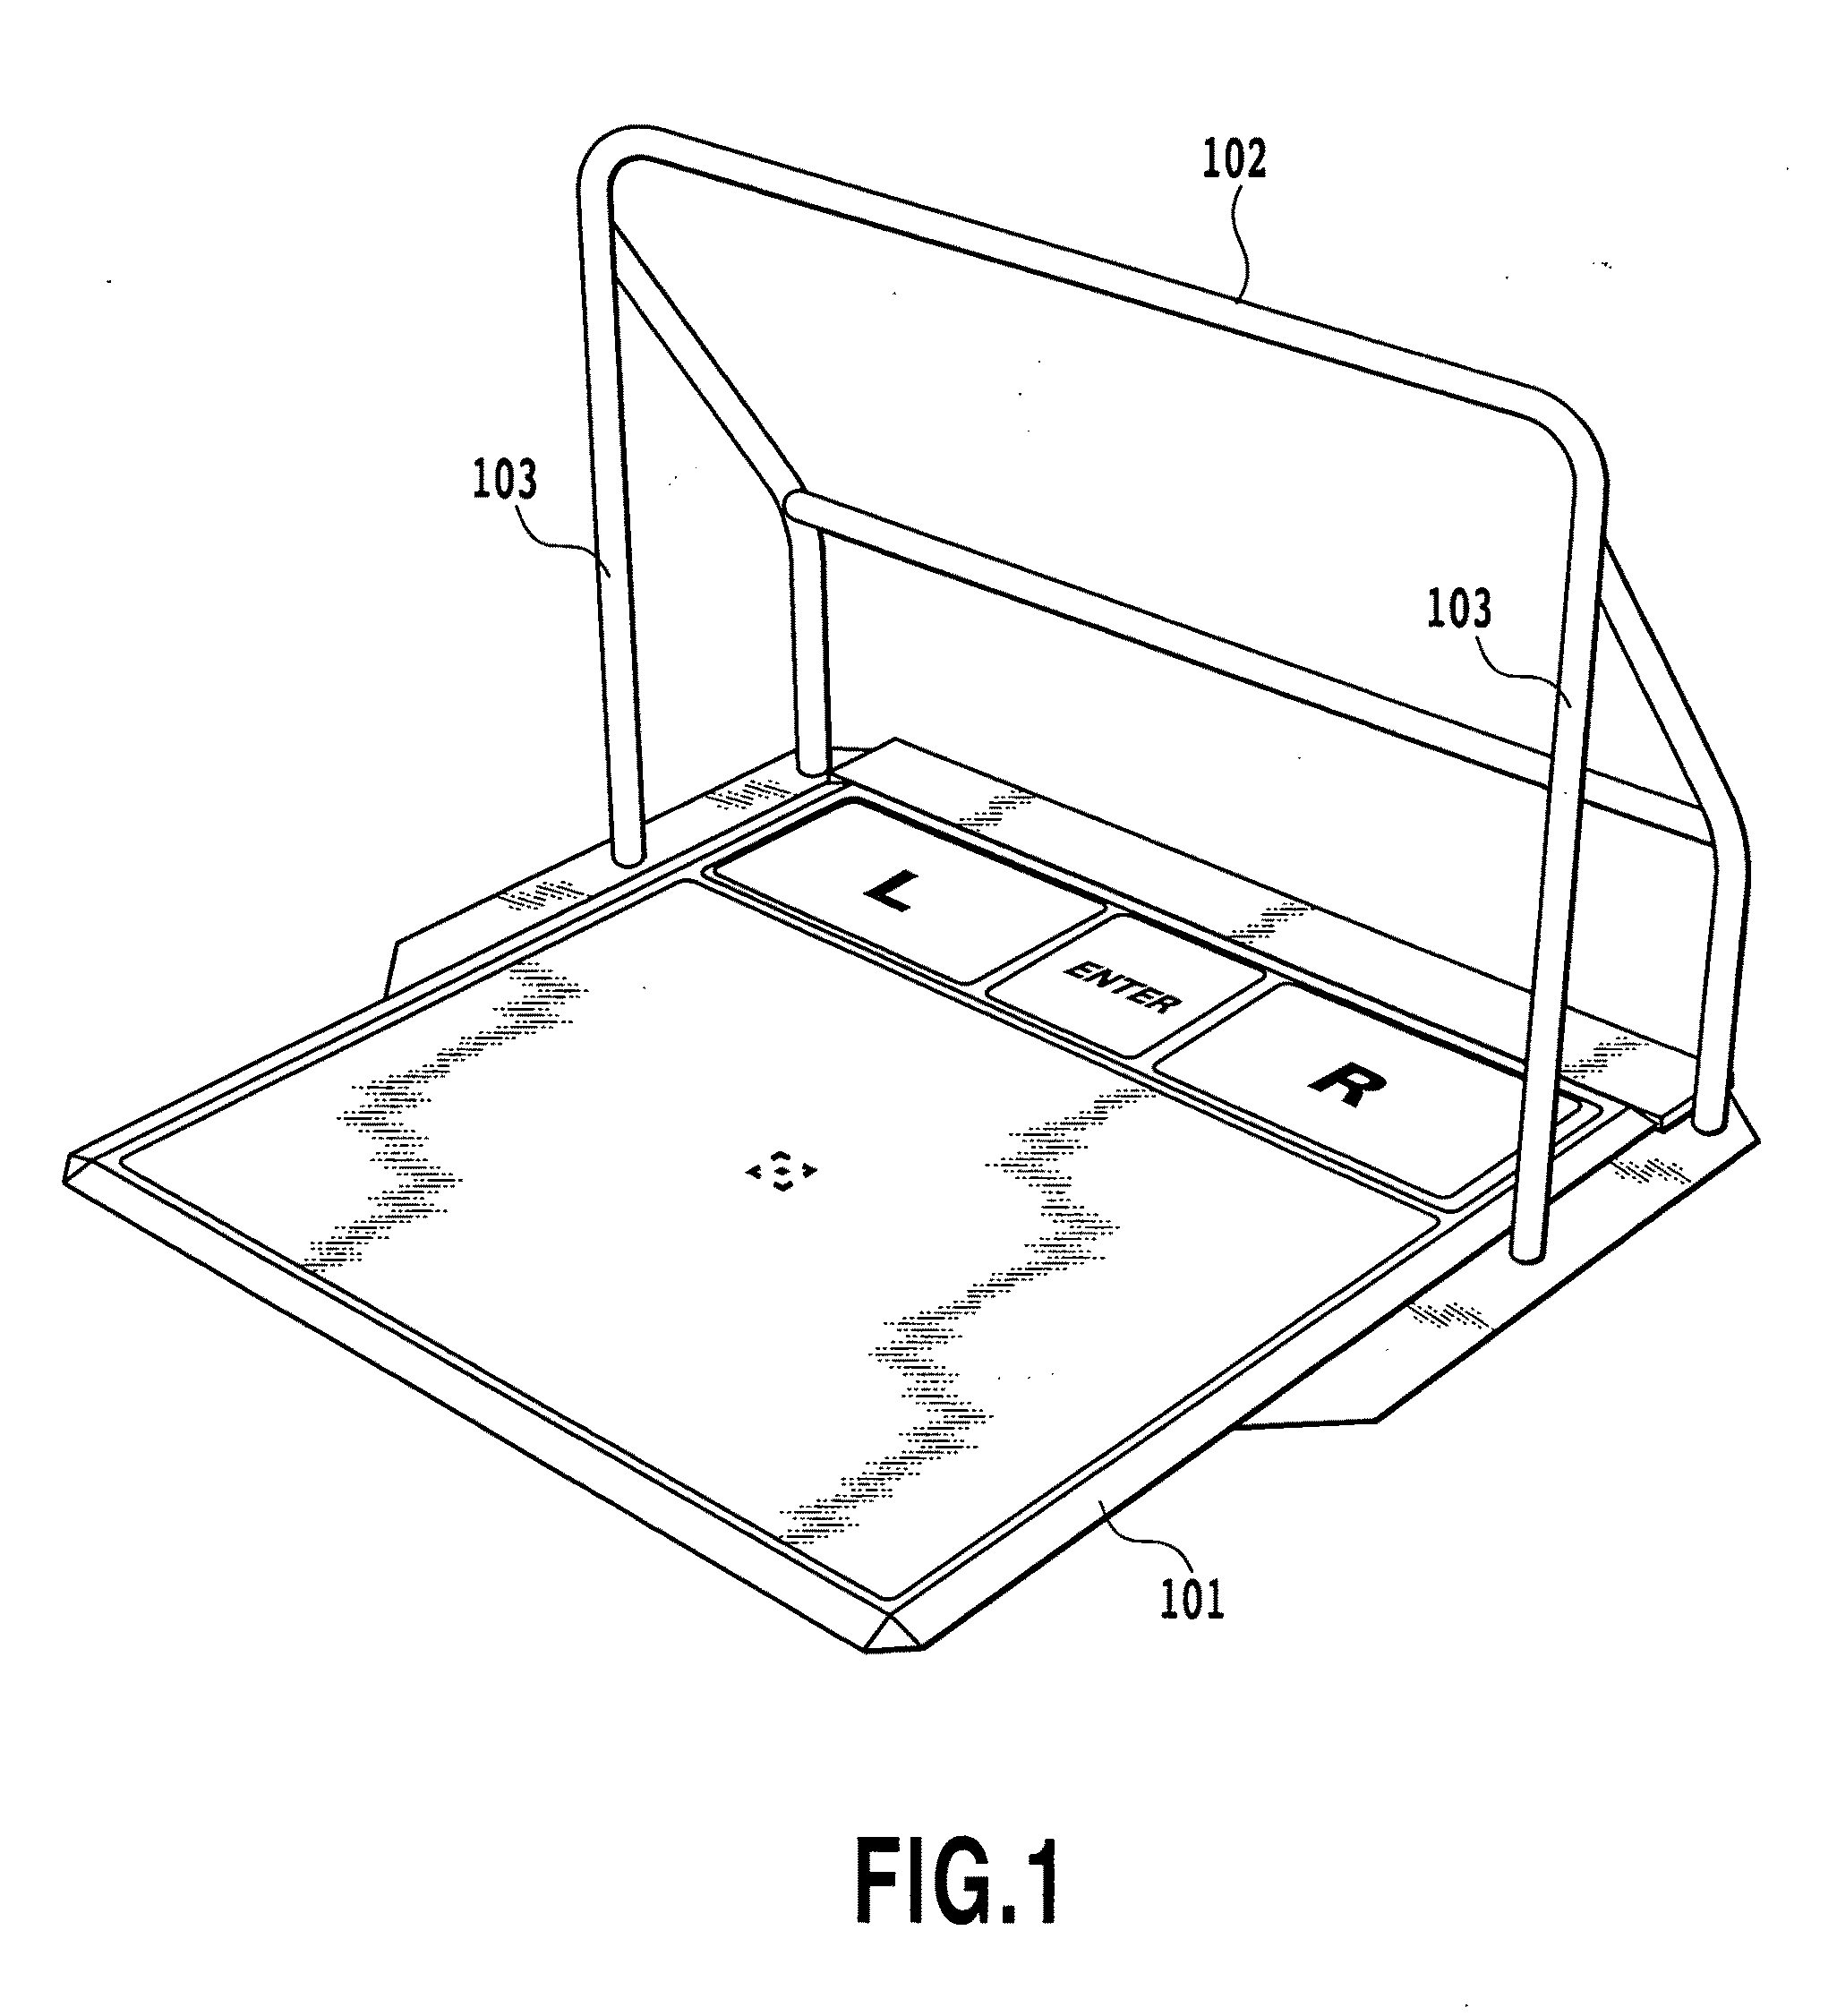 Image recognition device and image recognition method